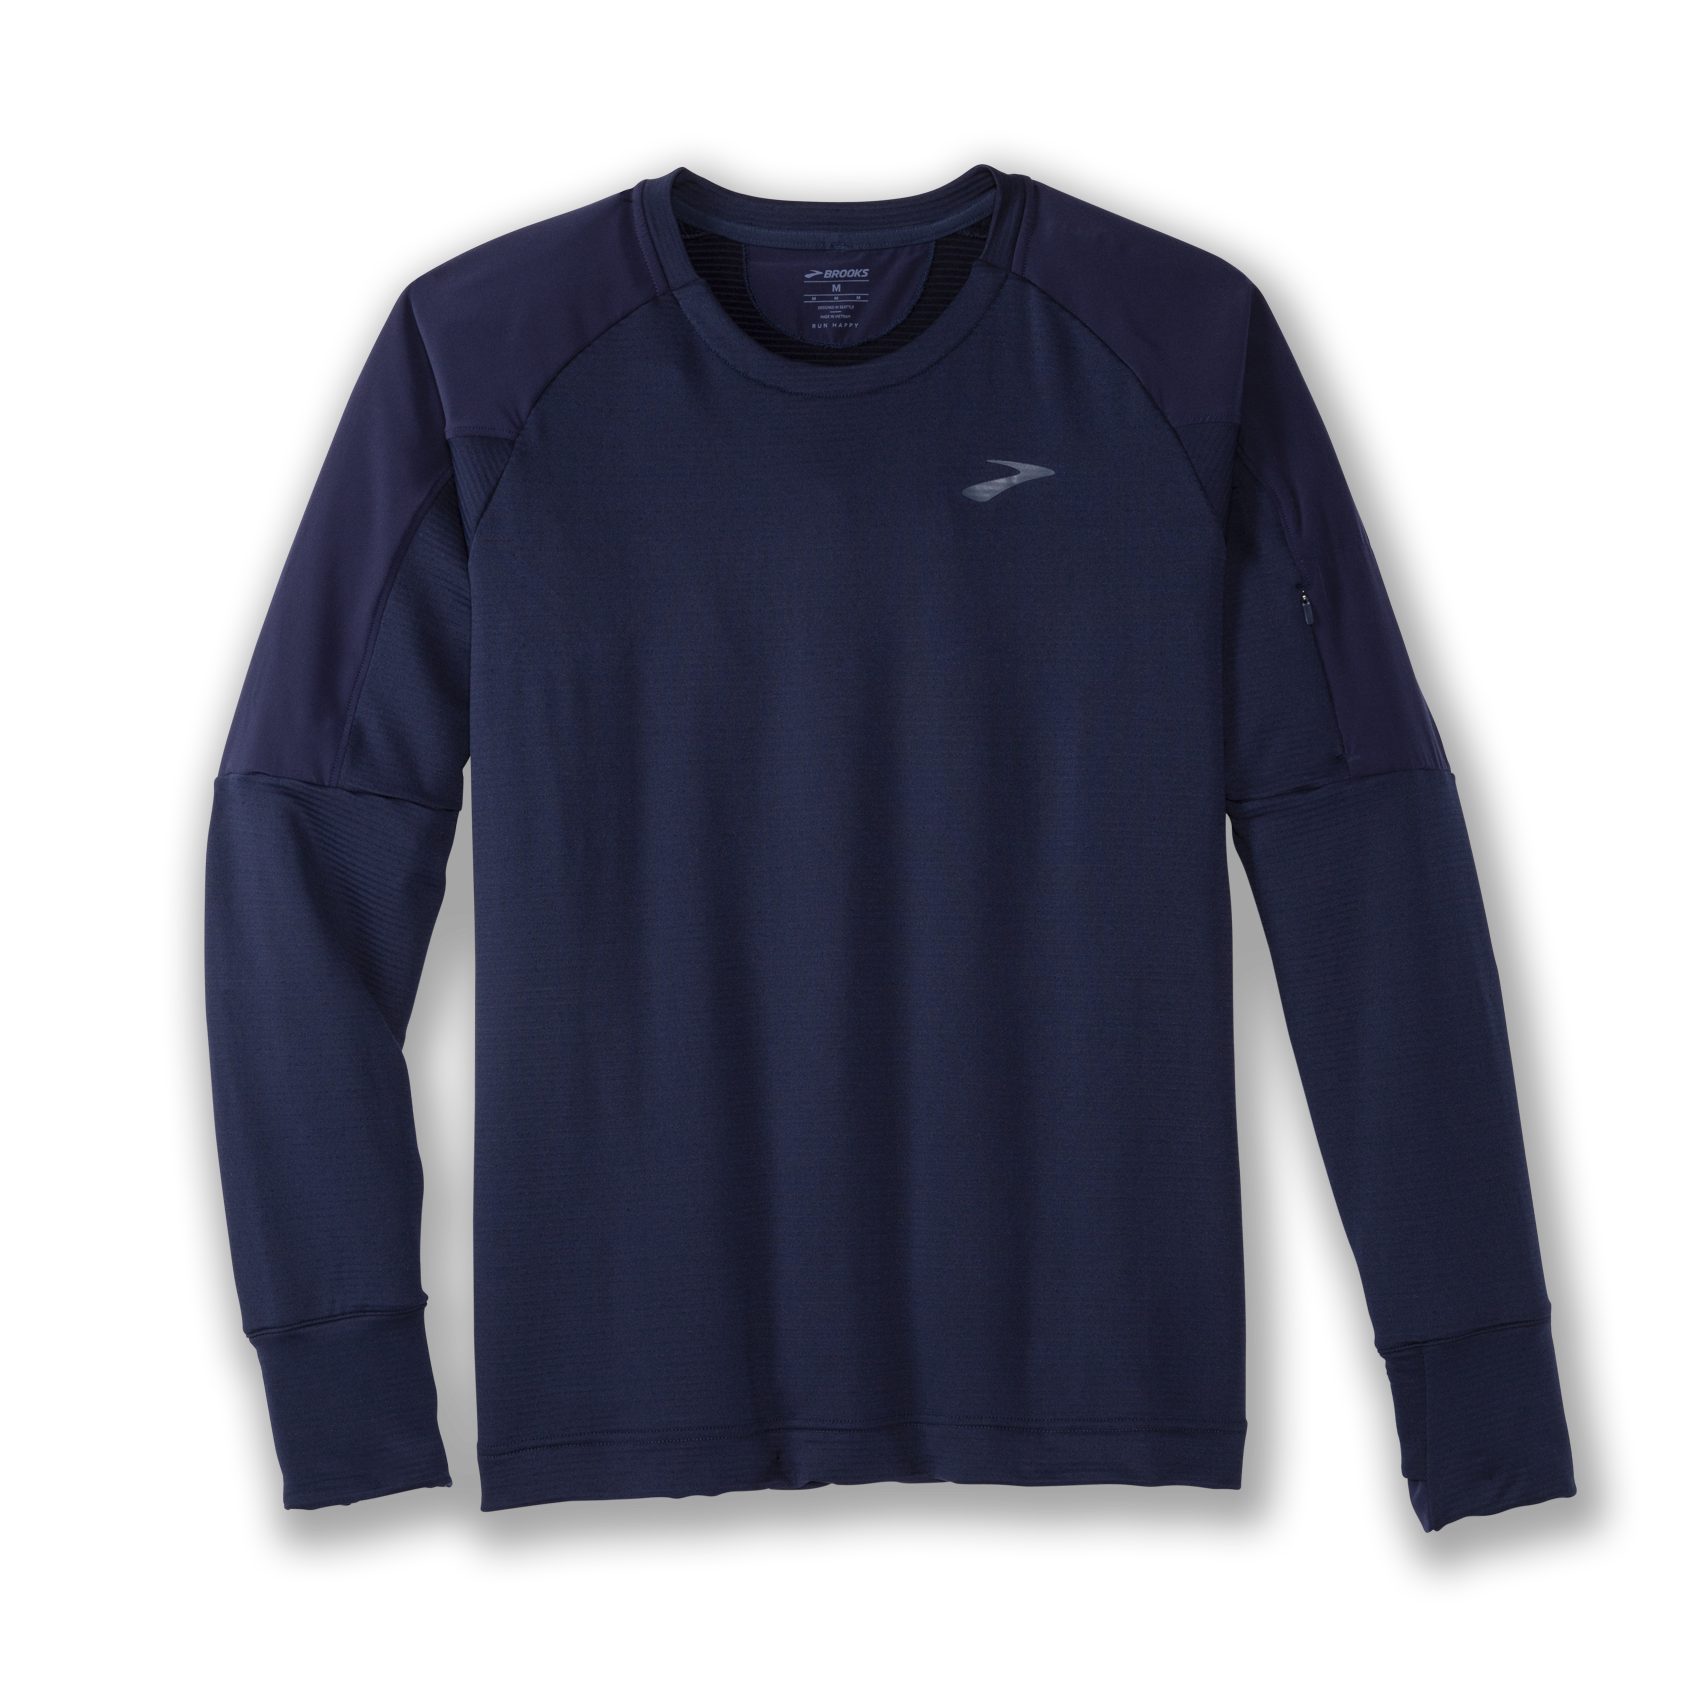 Higher State Mens Crew Neck Long Sleeve Running Top 2.0 Navy Blue Sports 